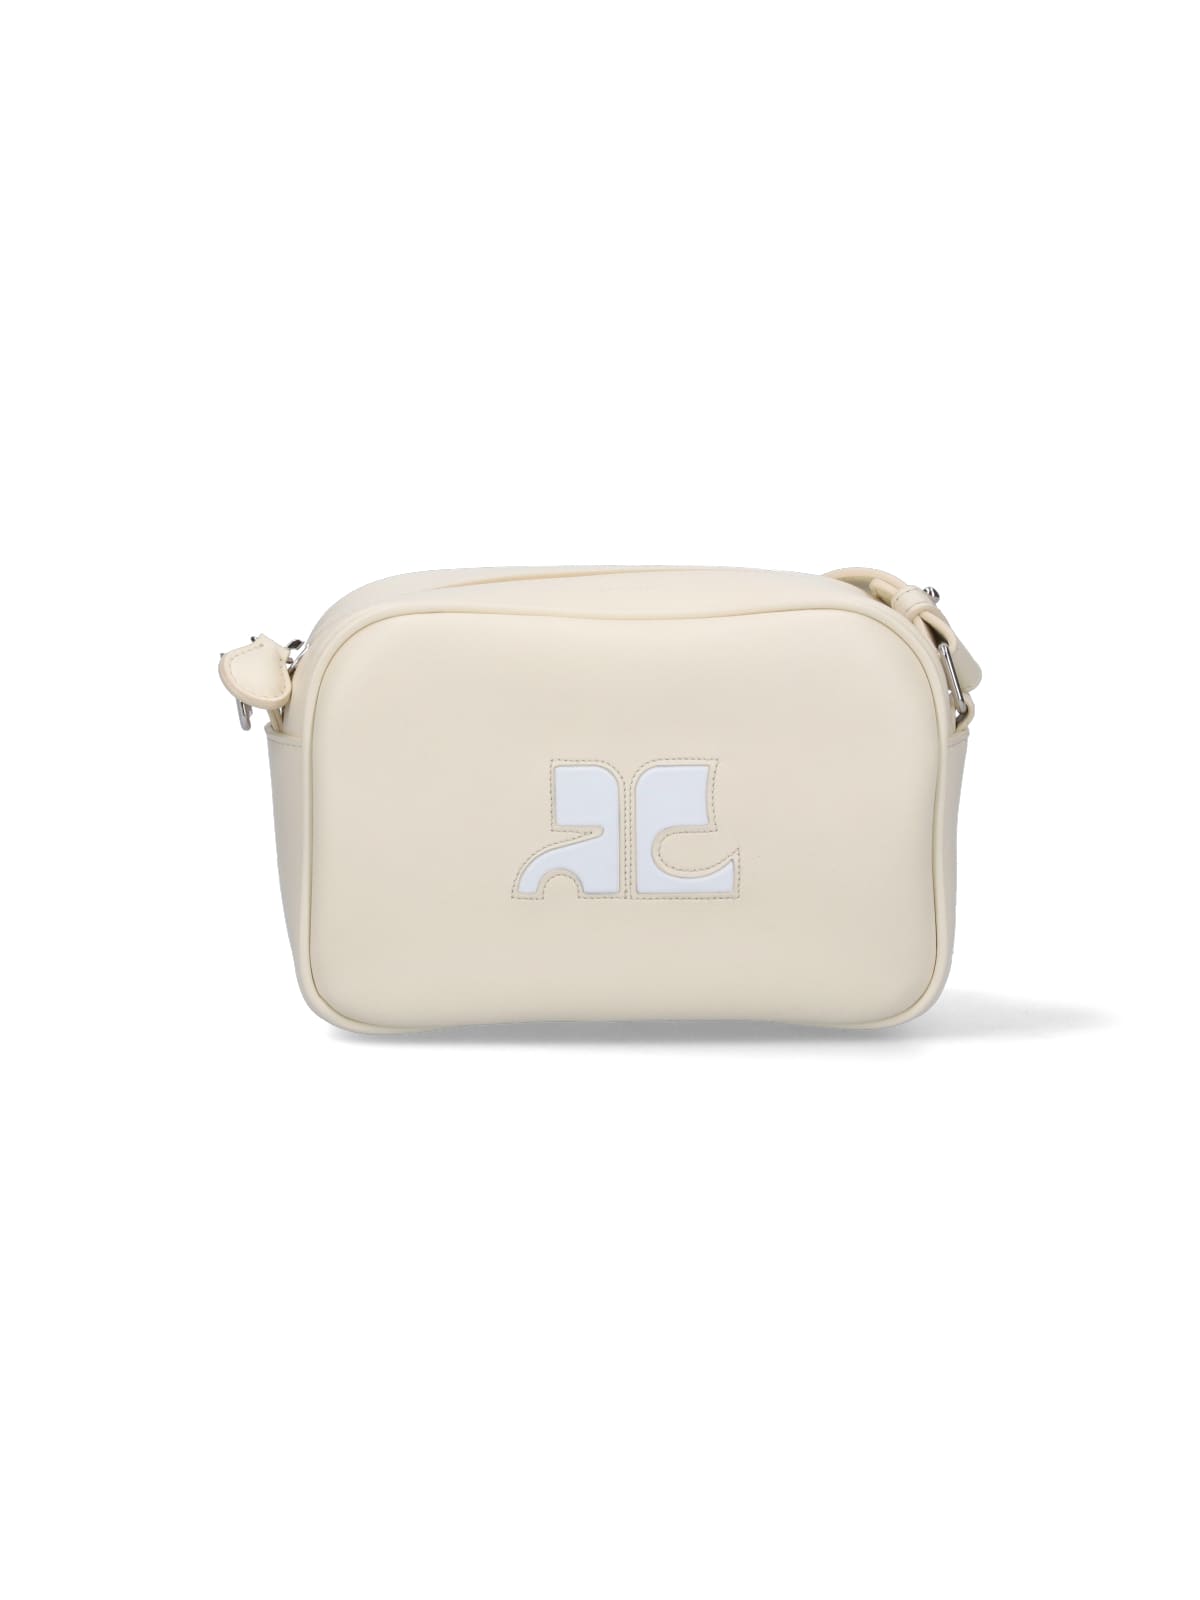 Courrèges Re-edition Camera Bag In Crema